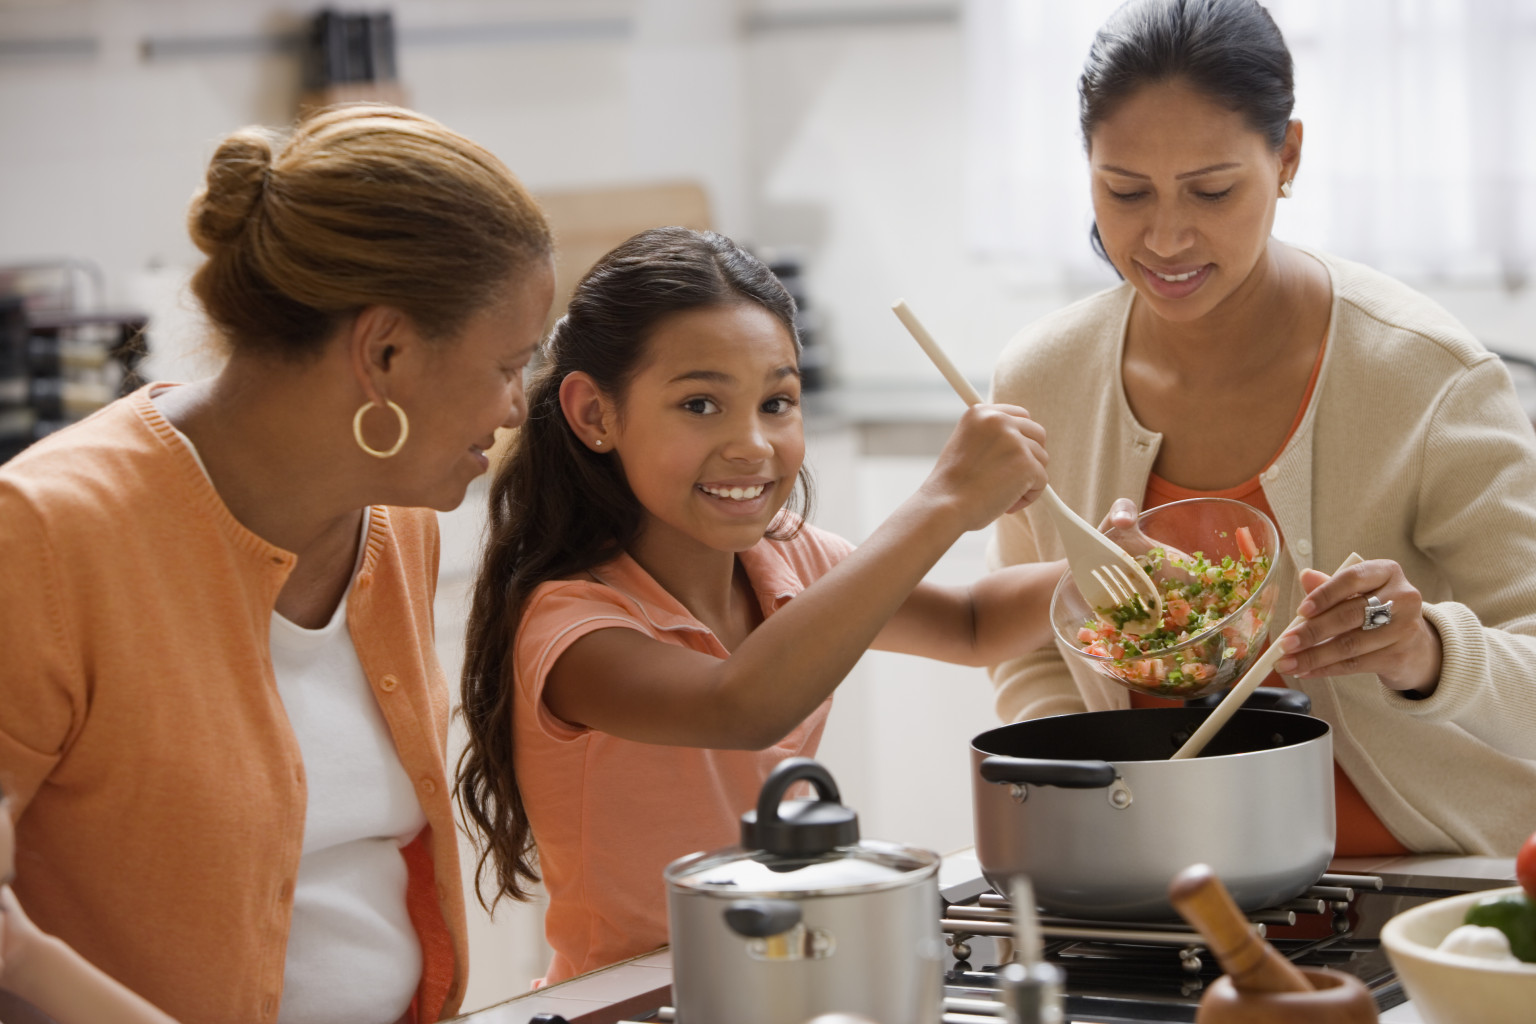 Cooking Fun, Cooking Healthy With ChopChop Magazine and Cookbook | HuffPost